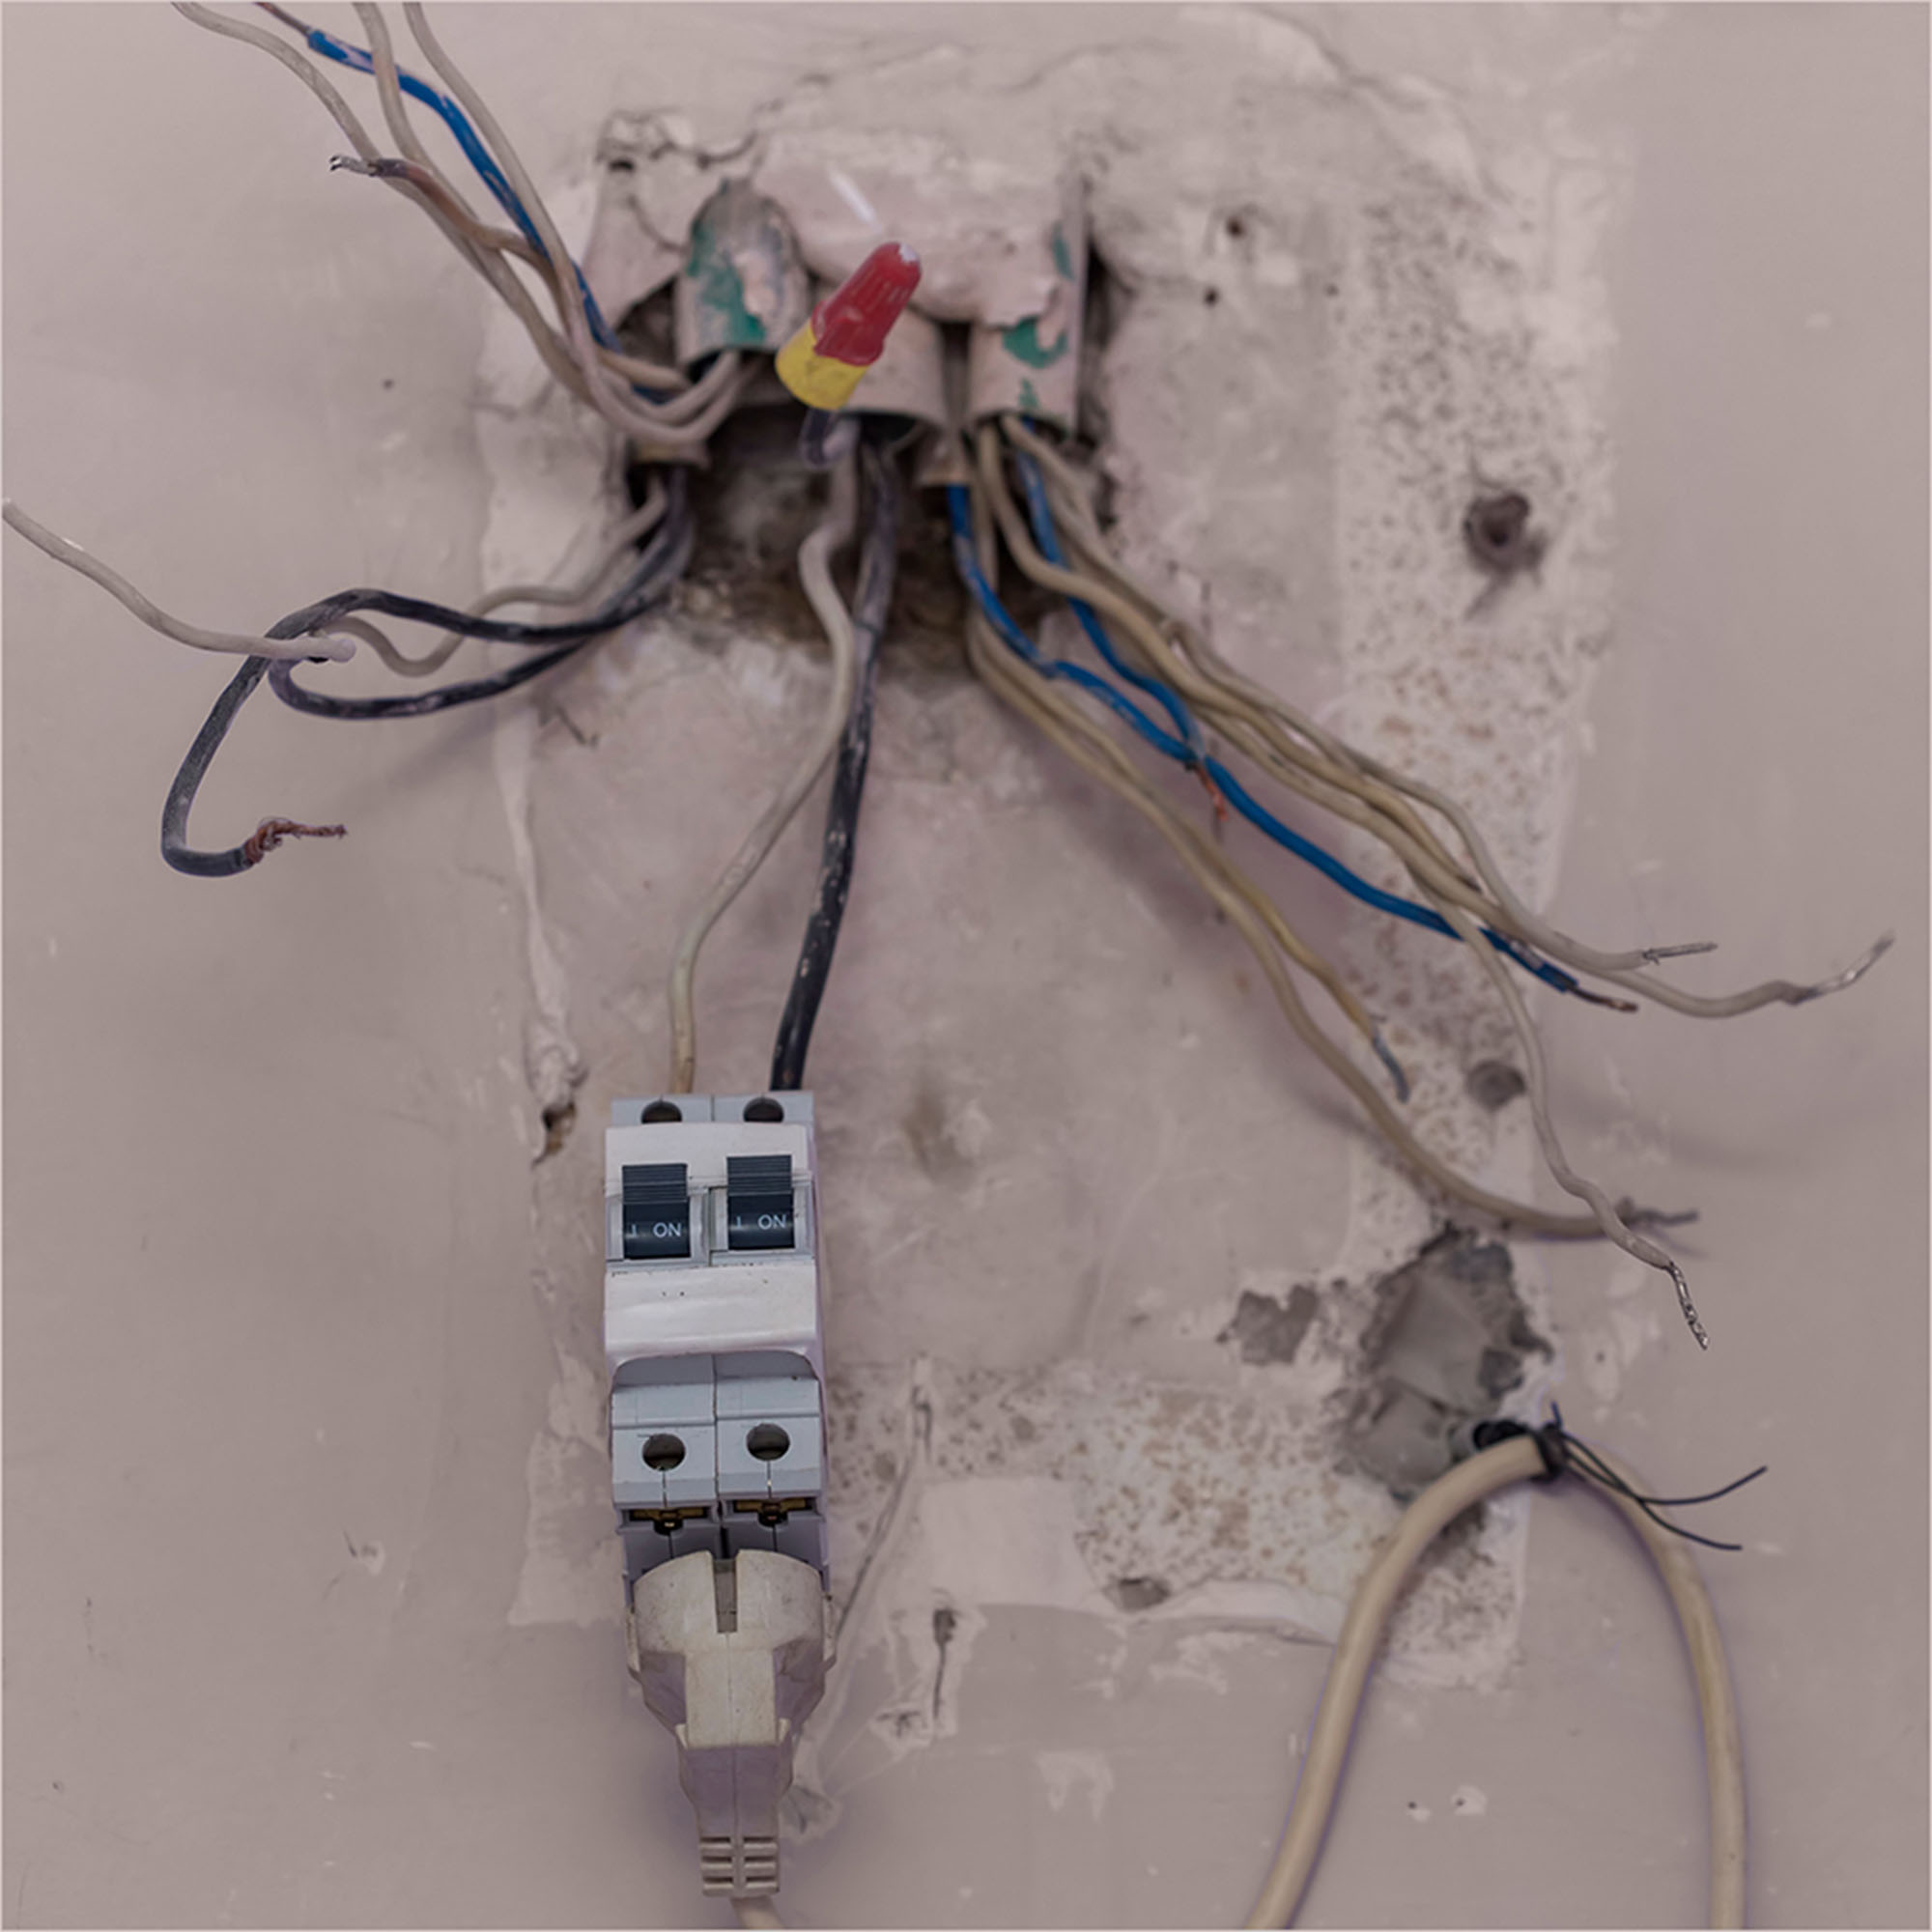 How to Identify Wiring in an Old House - The Home Depot